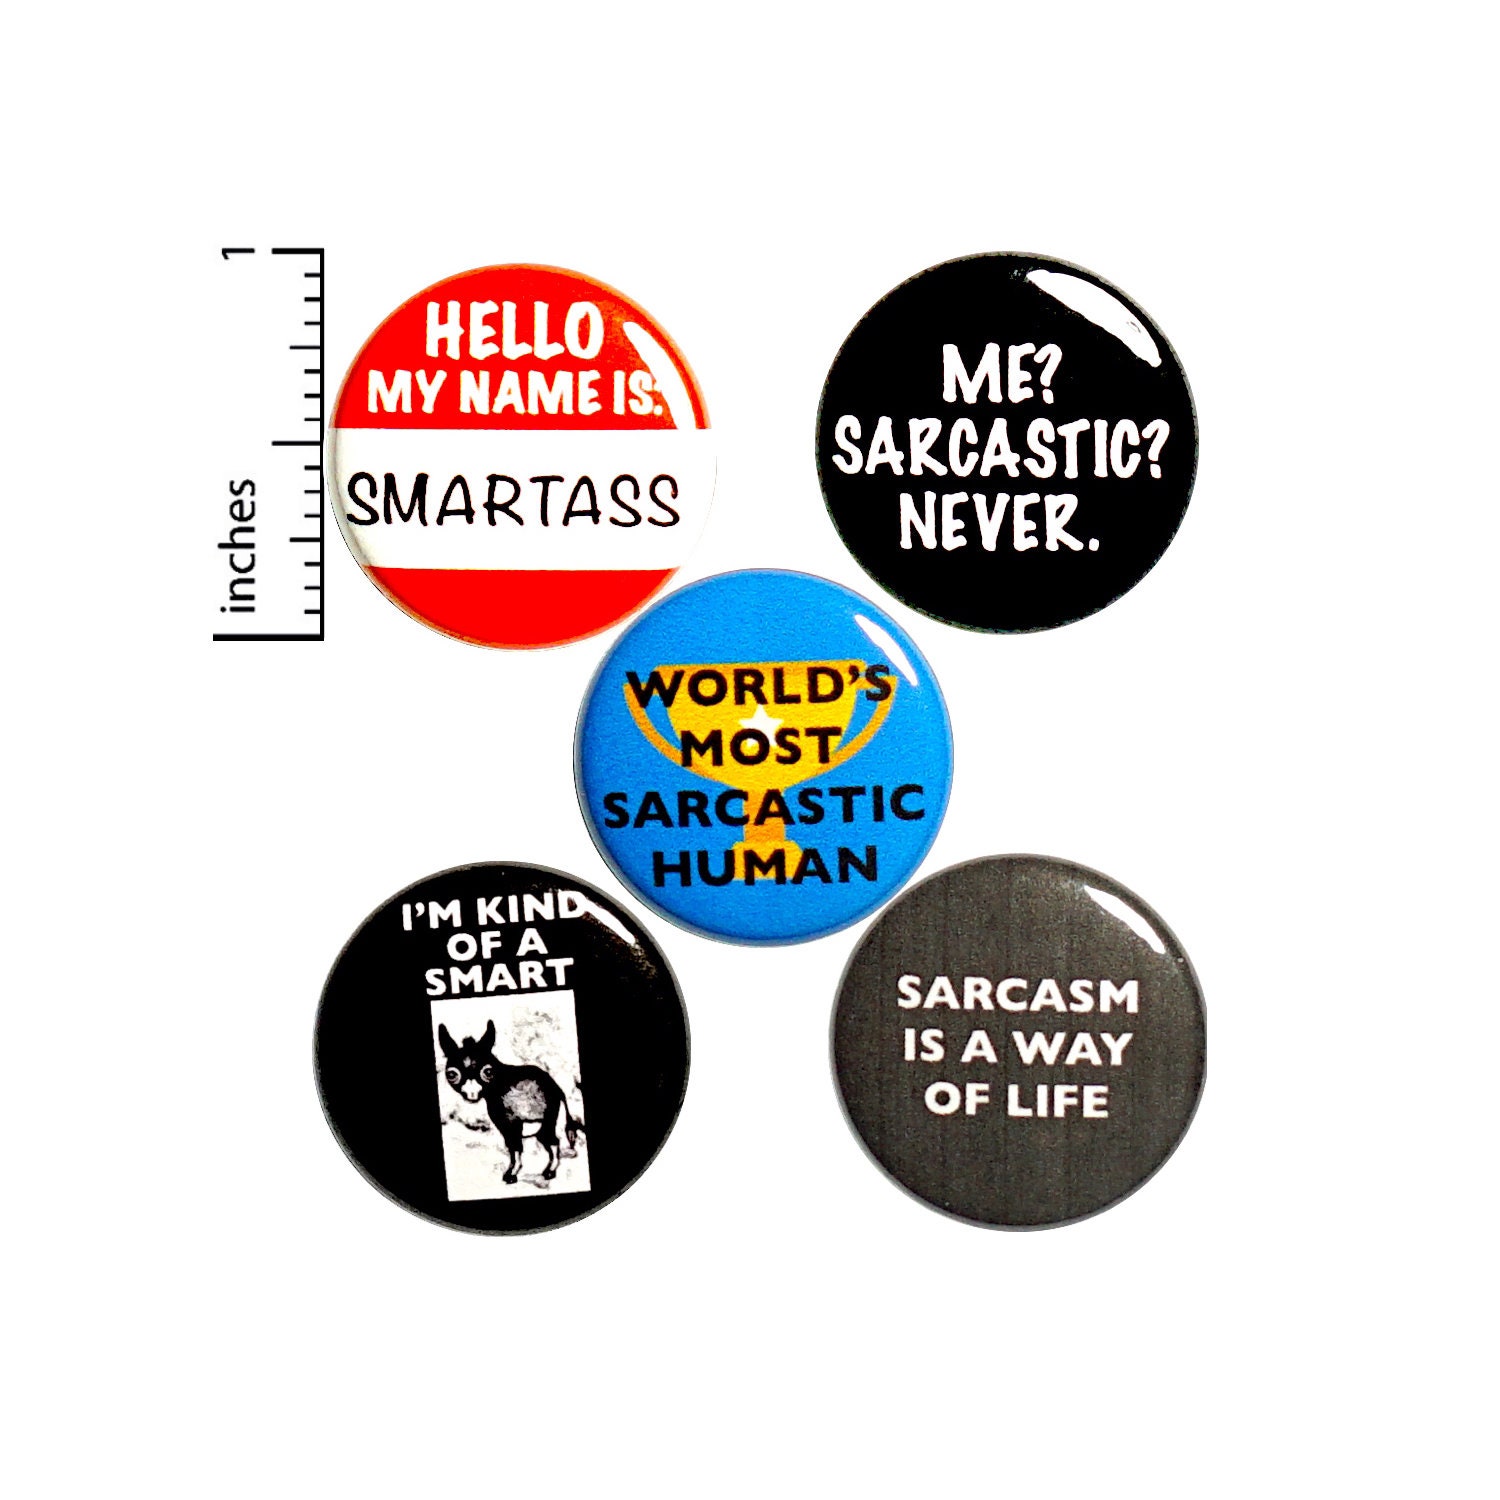 Sarcastic Funny Buttons Edgy Humor Pin For Backpack Or Jackets Lapel